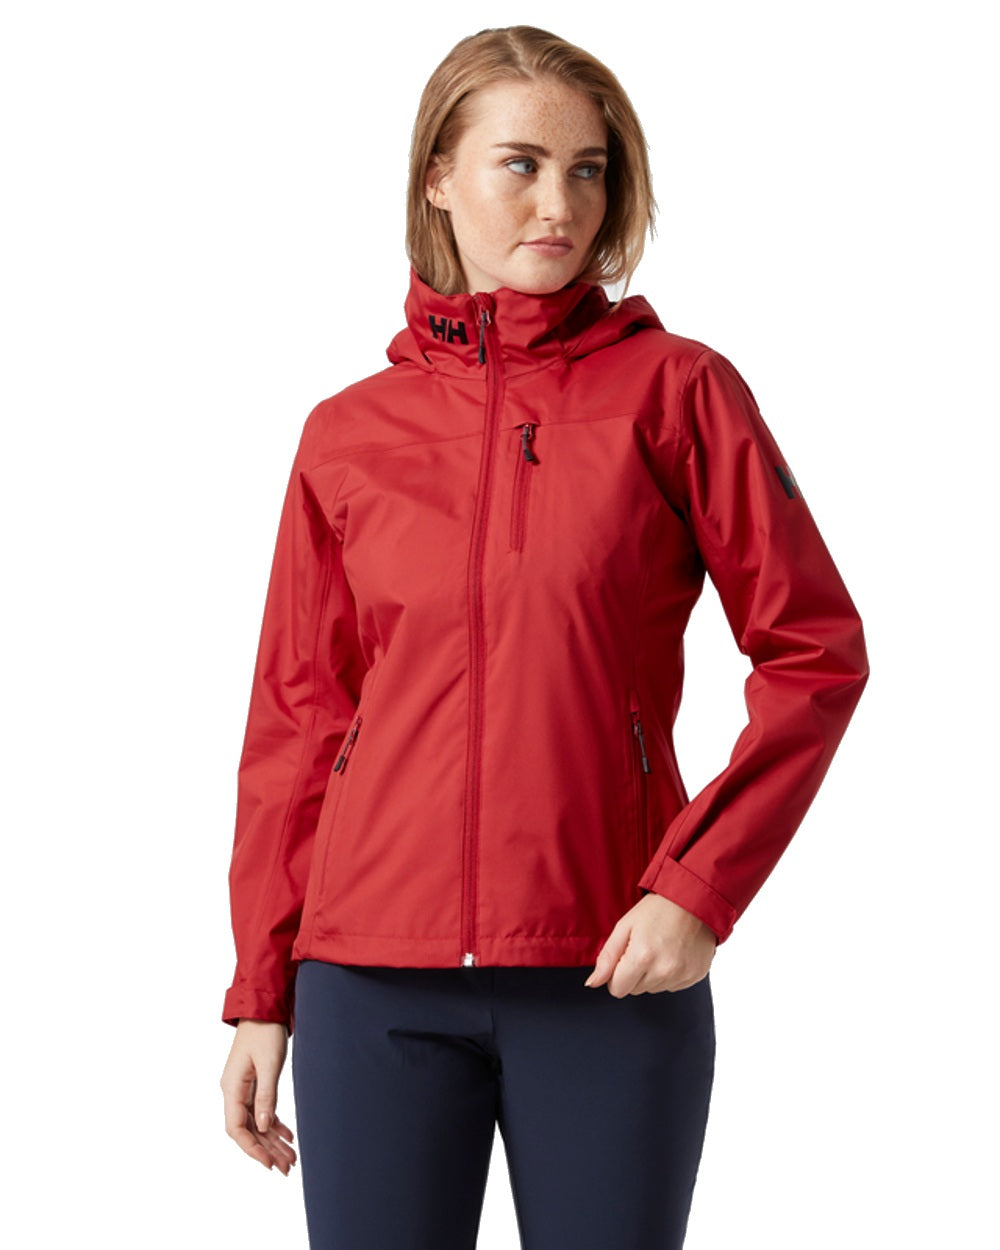 Helly Hansen Womens Crew Hooded Midlayer Jacket in Red 